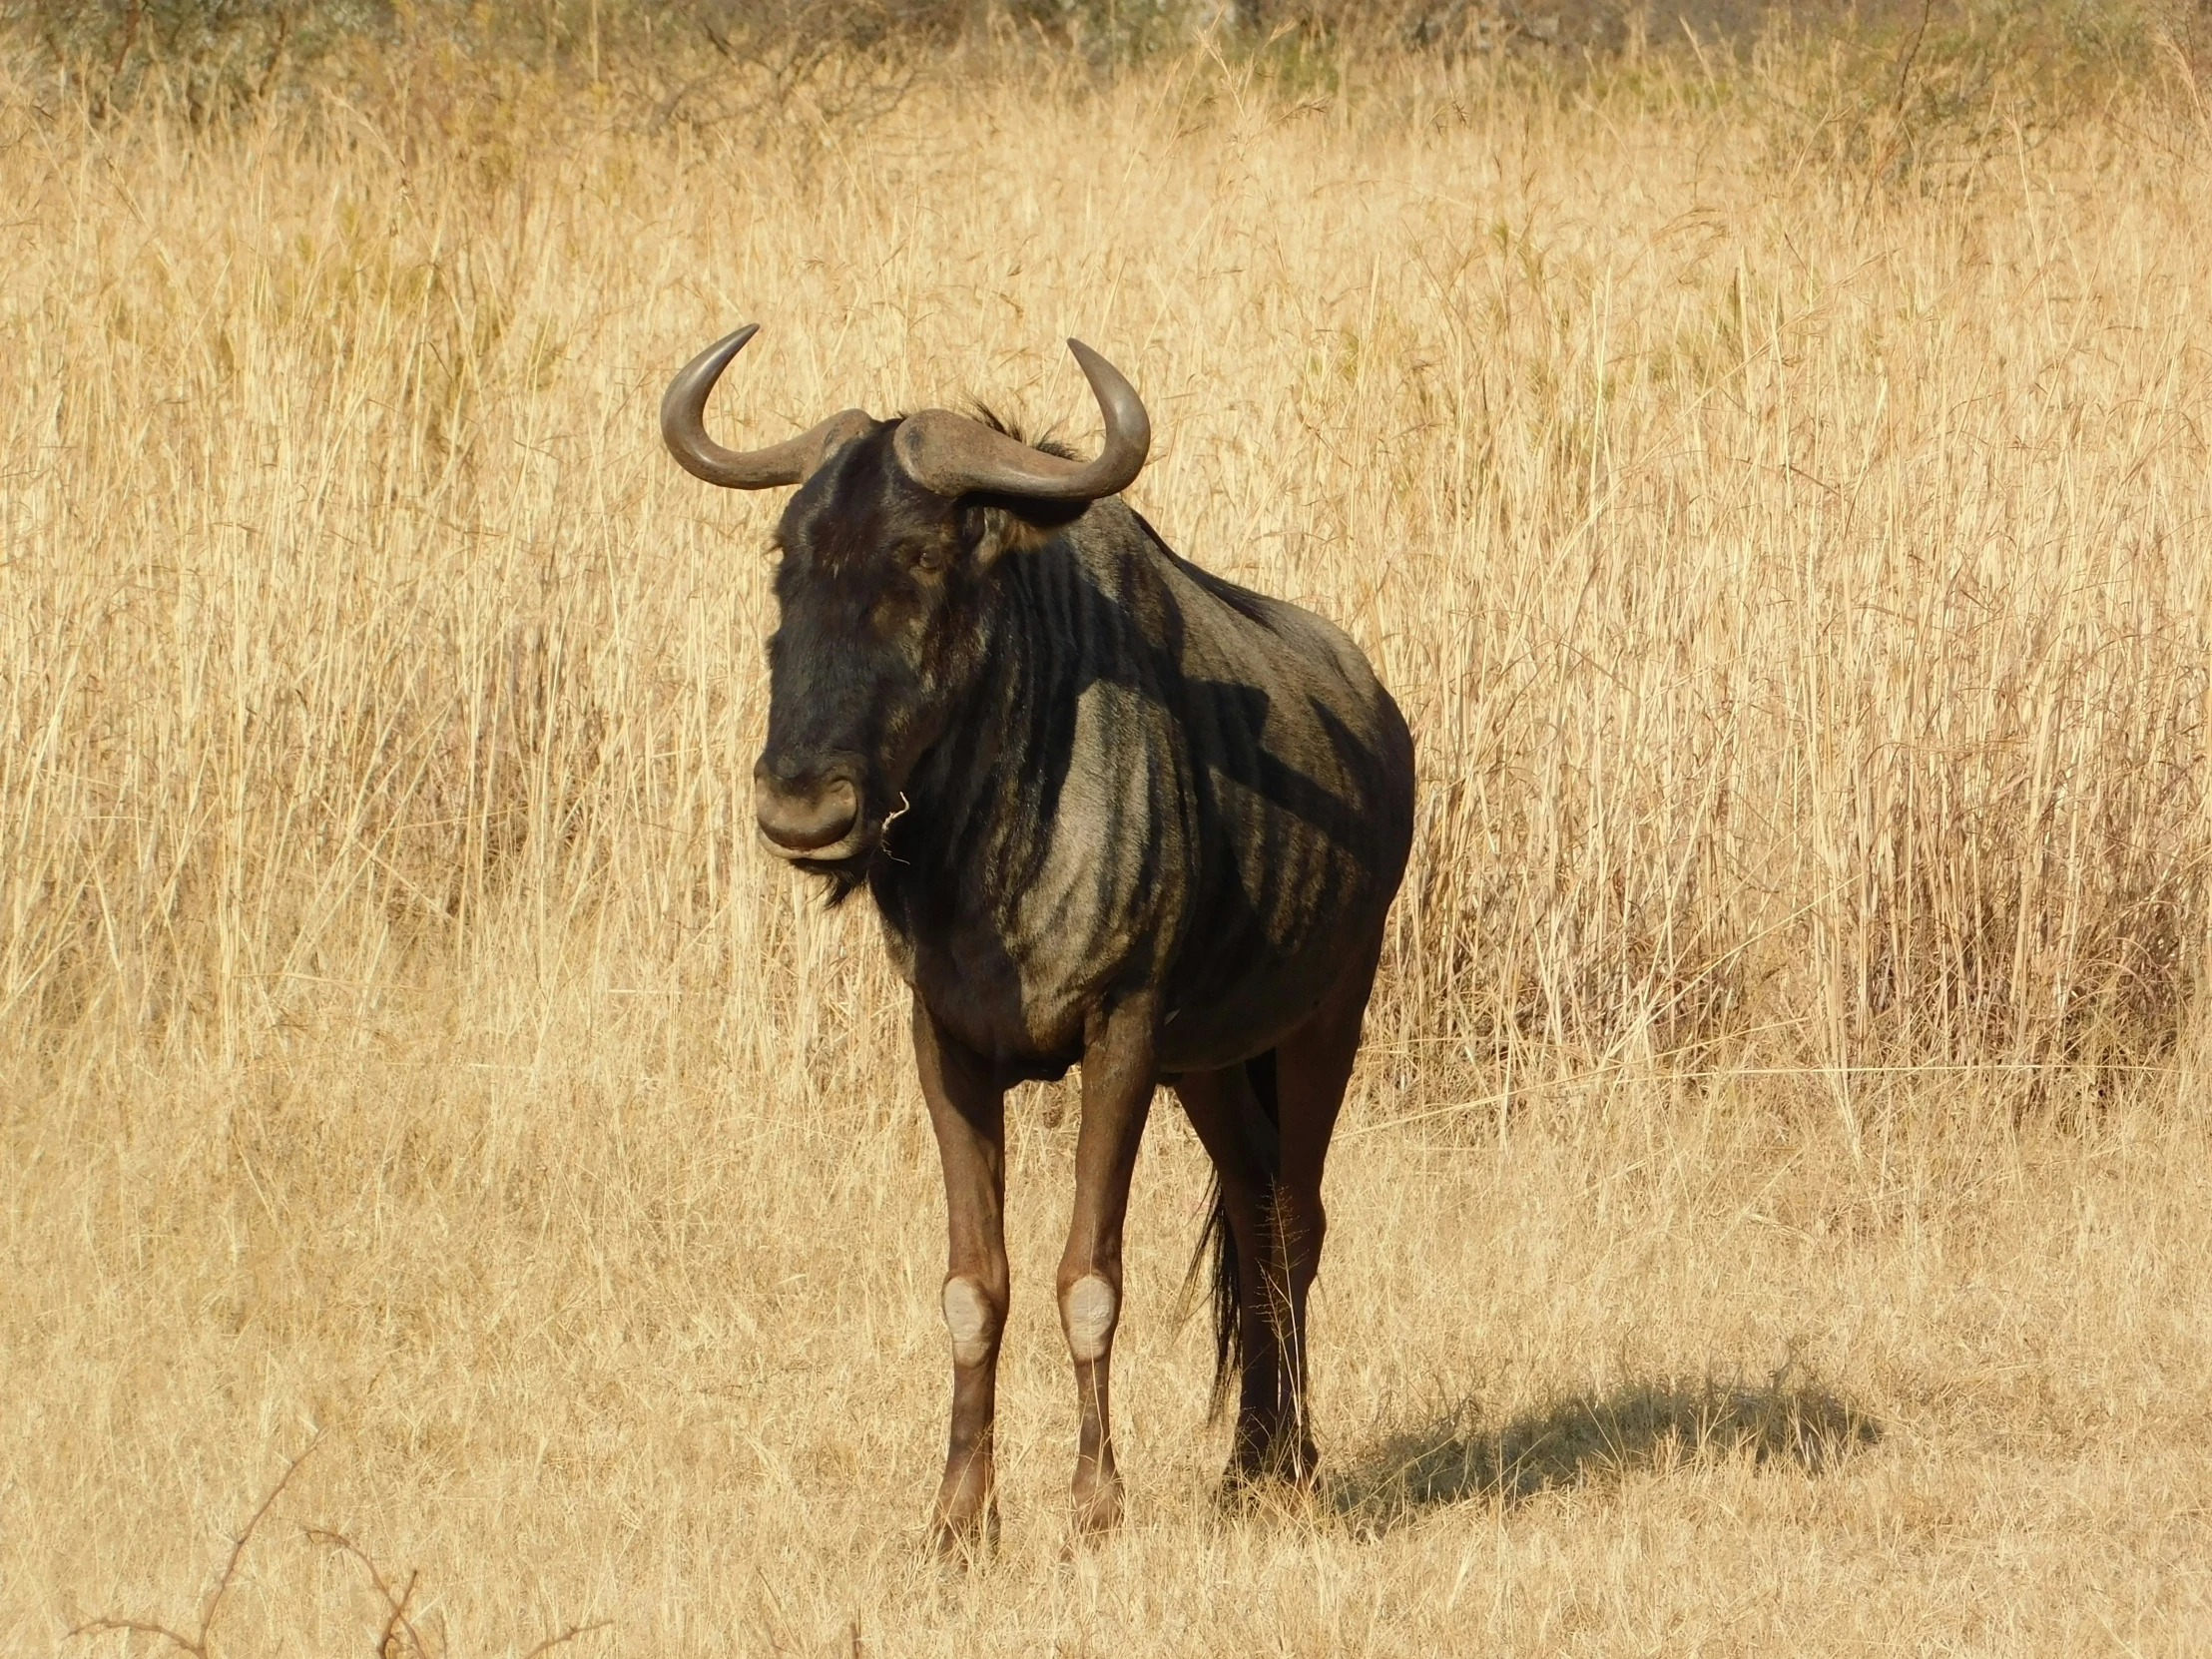 a large bull standing in the middle of a field